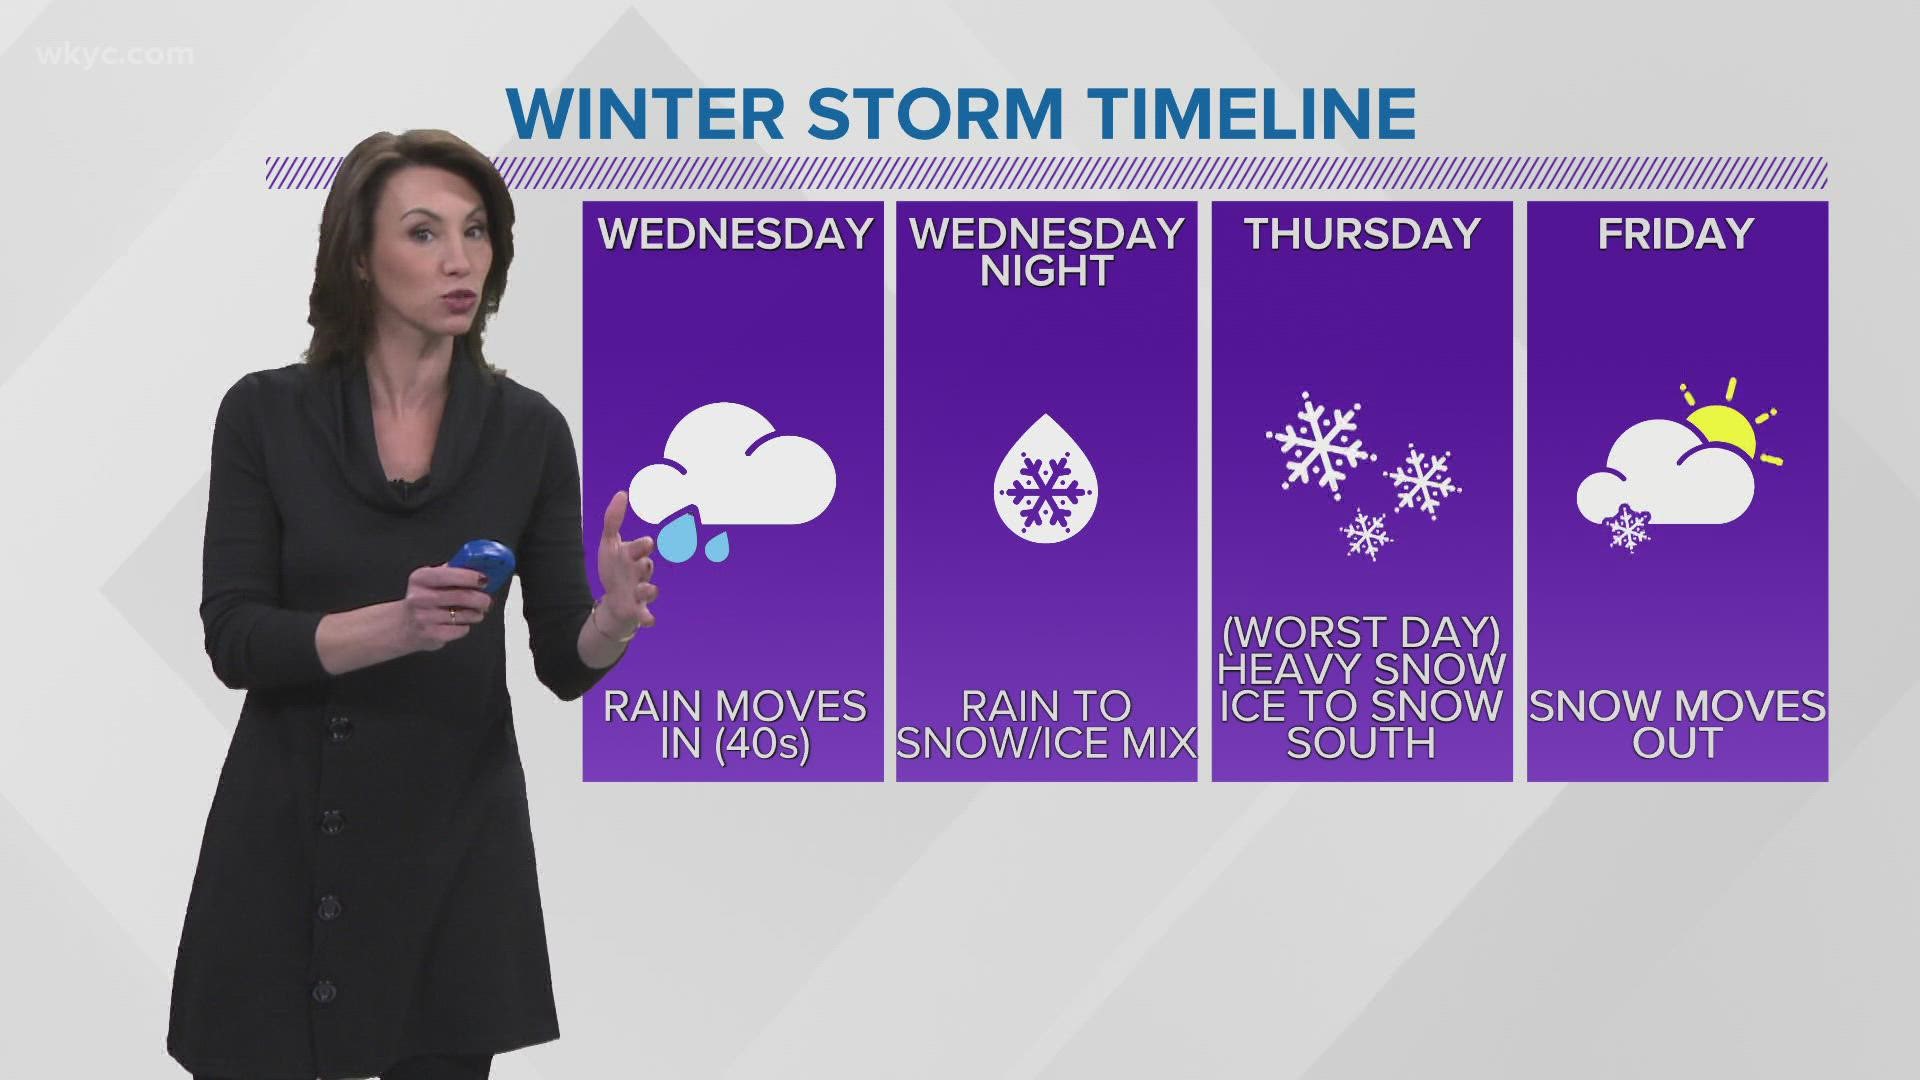 Residents can expected to see plenty of rain and ice and snow over a multi-day period.